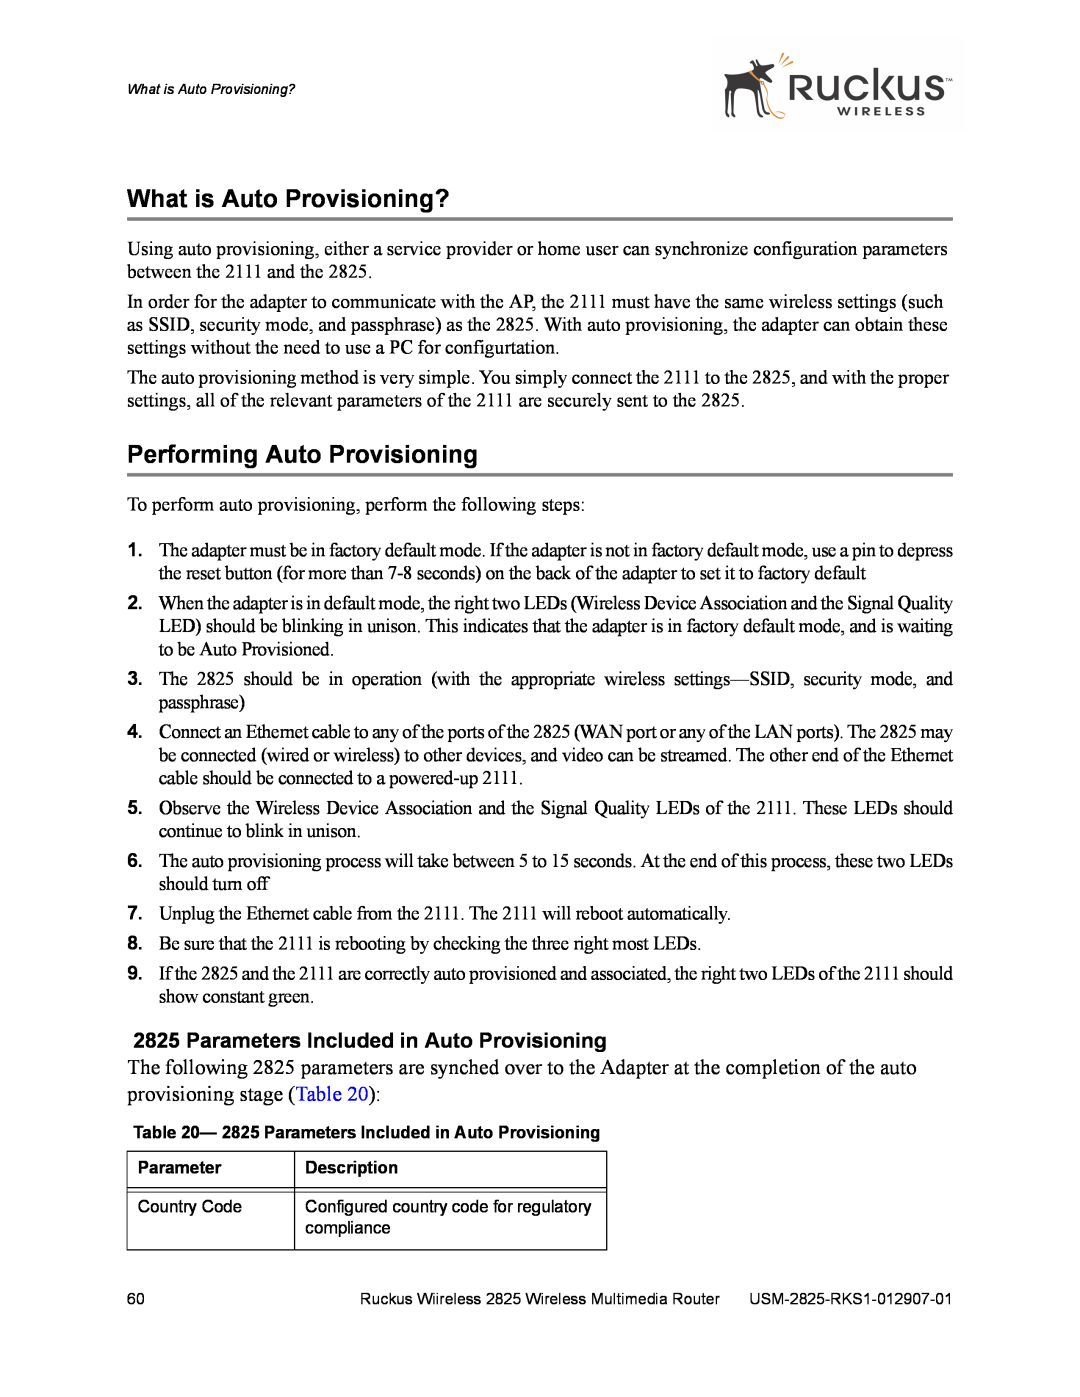 Ruckus Wireless 2825 What is Auto Provisioning?, Performing Auto Provisioning, Parameters Included in Auto Provisioning 